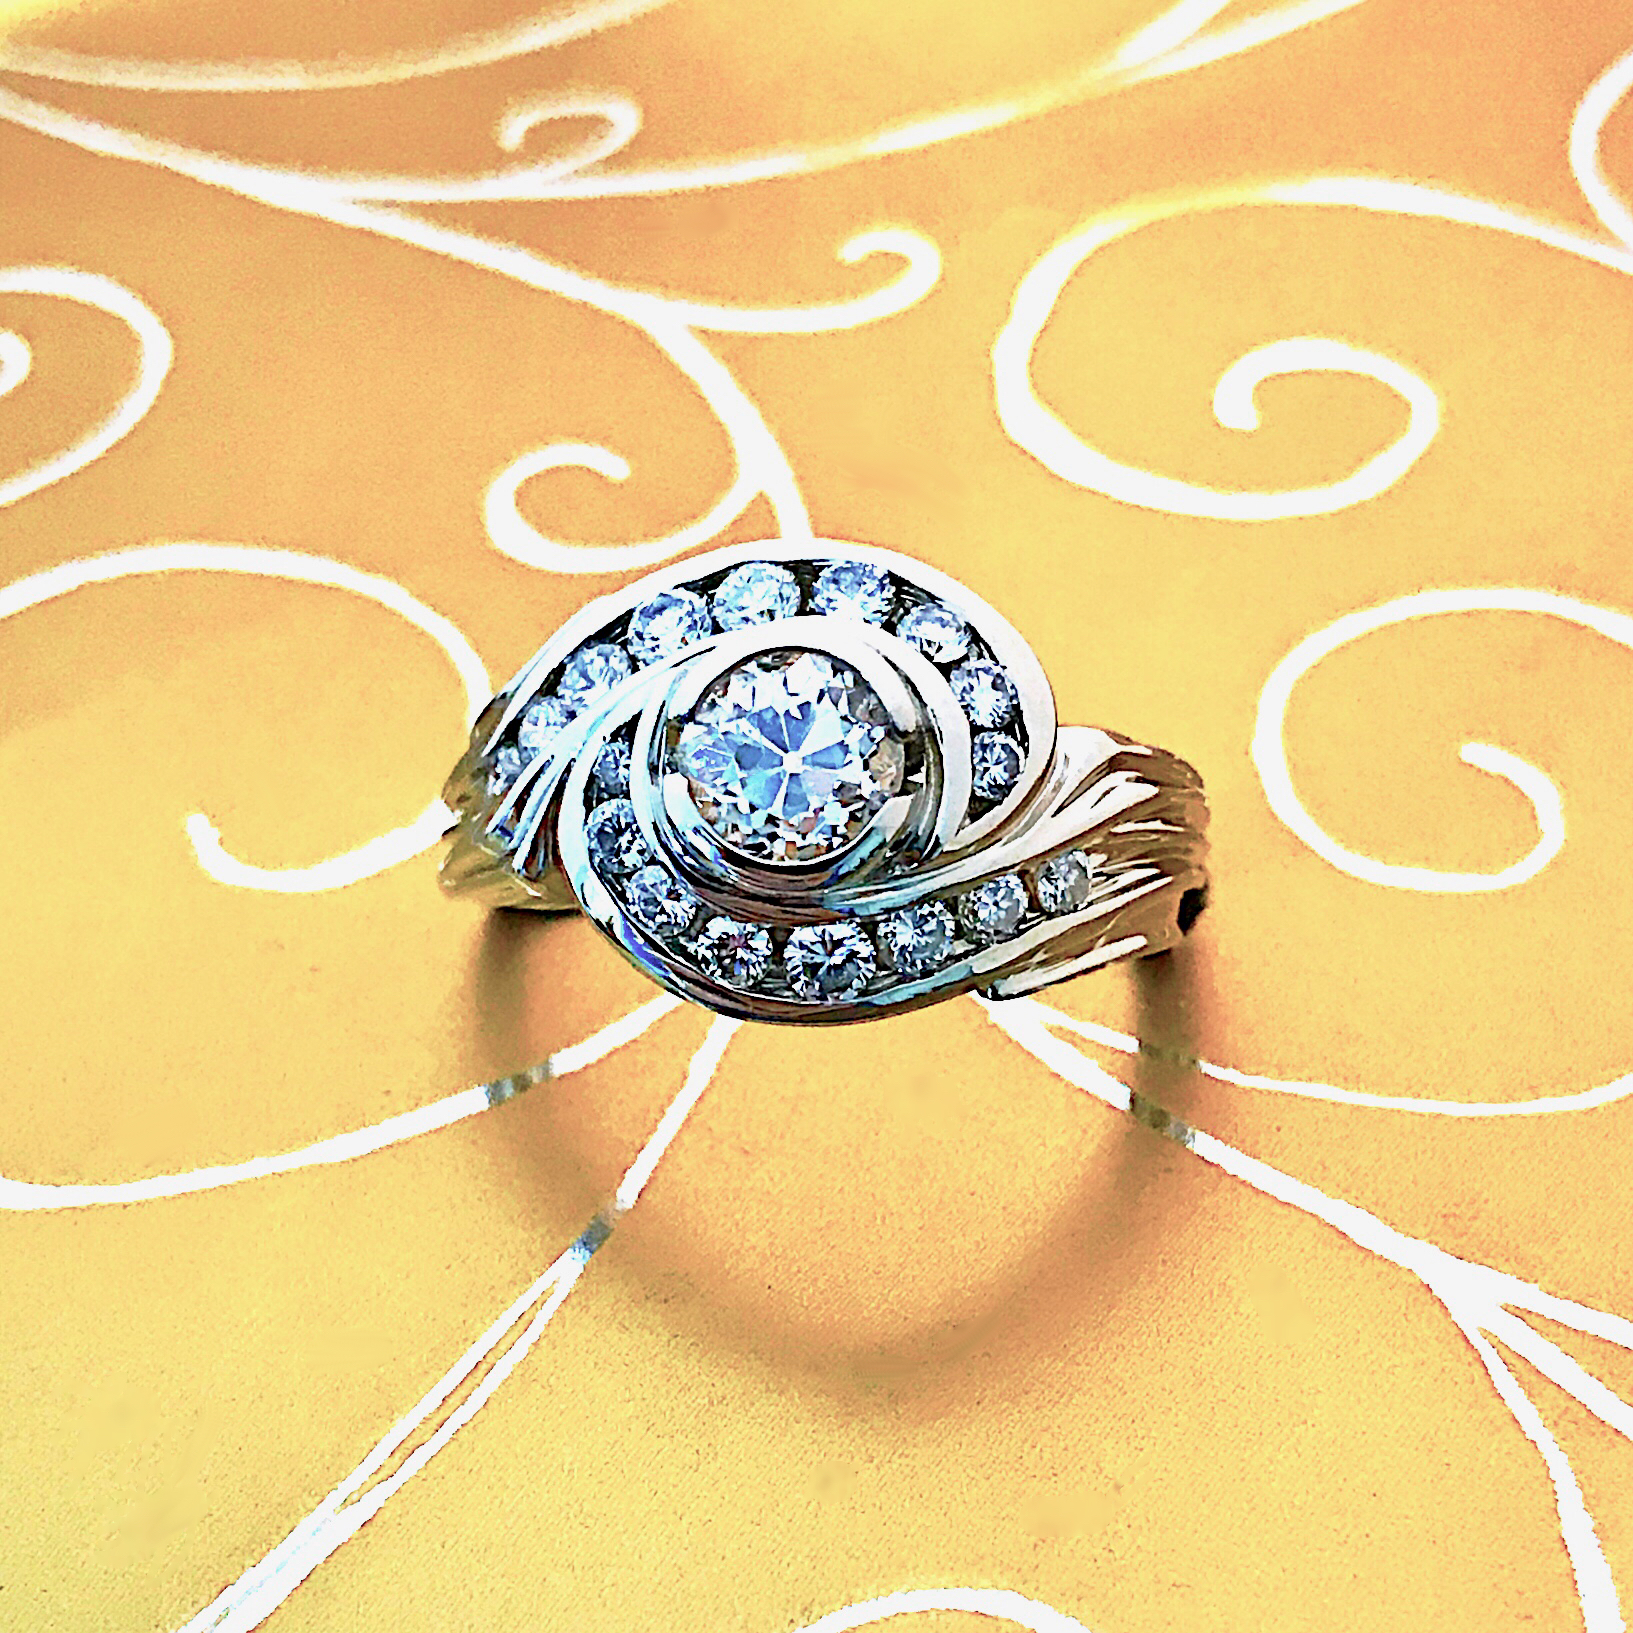 Custom Designed One Of A Kind 14 Kt White gold Partial Bezel and Channel Set Diamond Ring